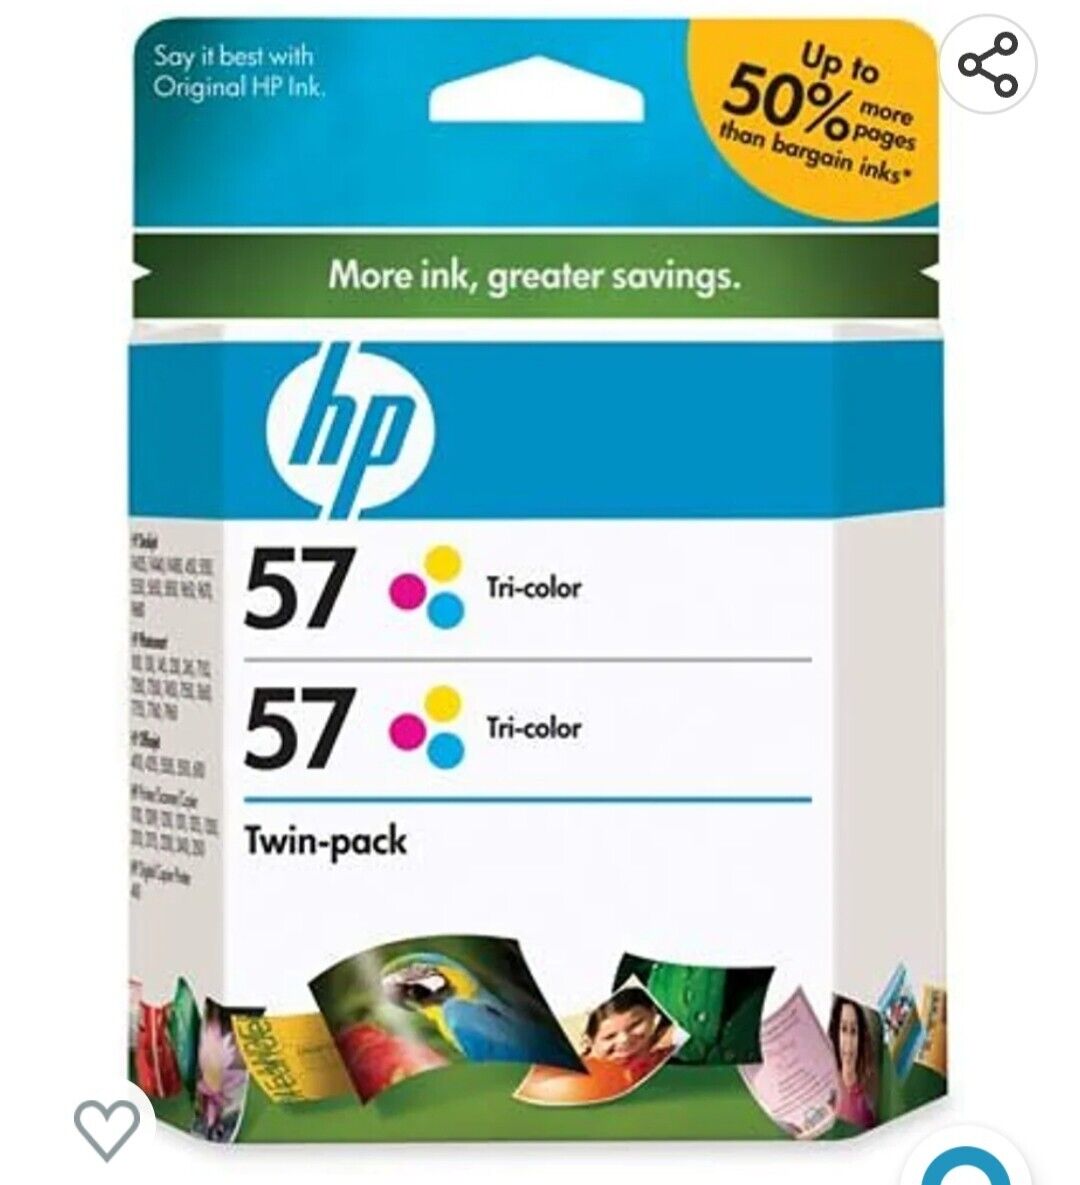 Lot of TWO Brand New HP 57 Tri-Colored Cartridges